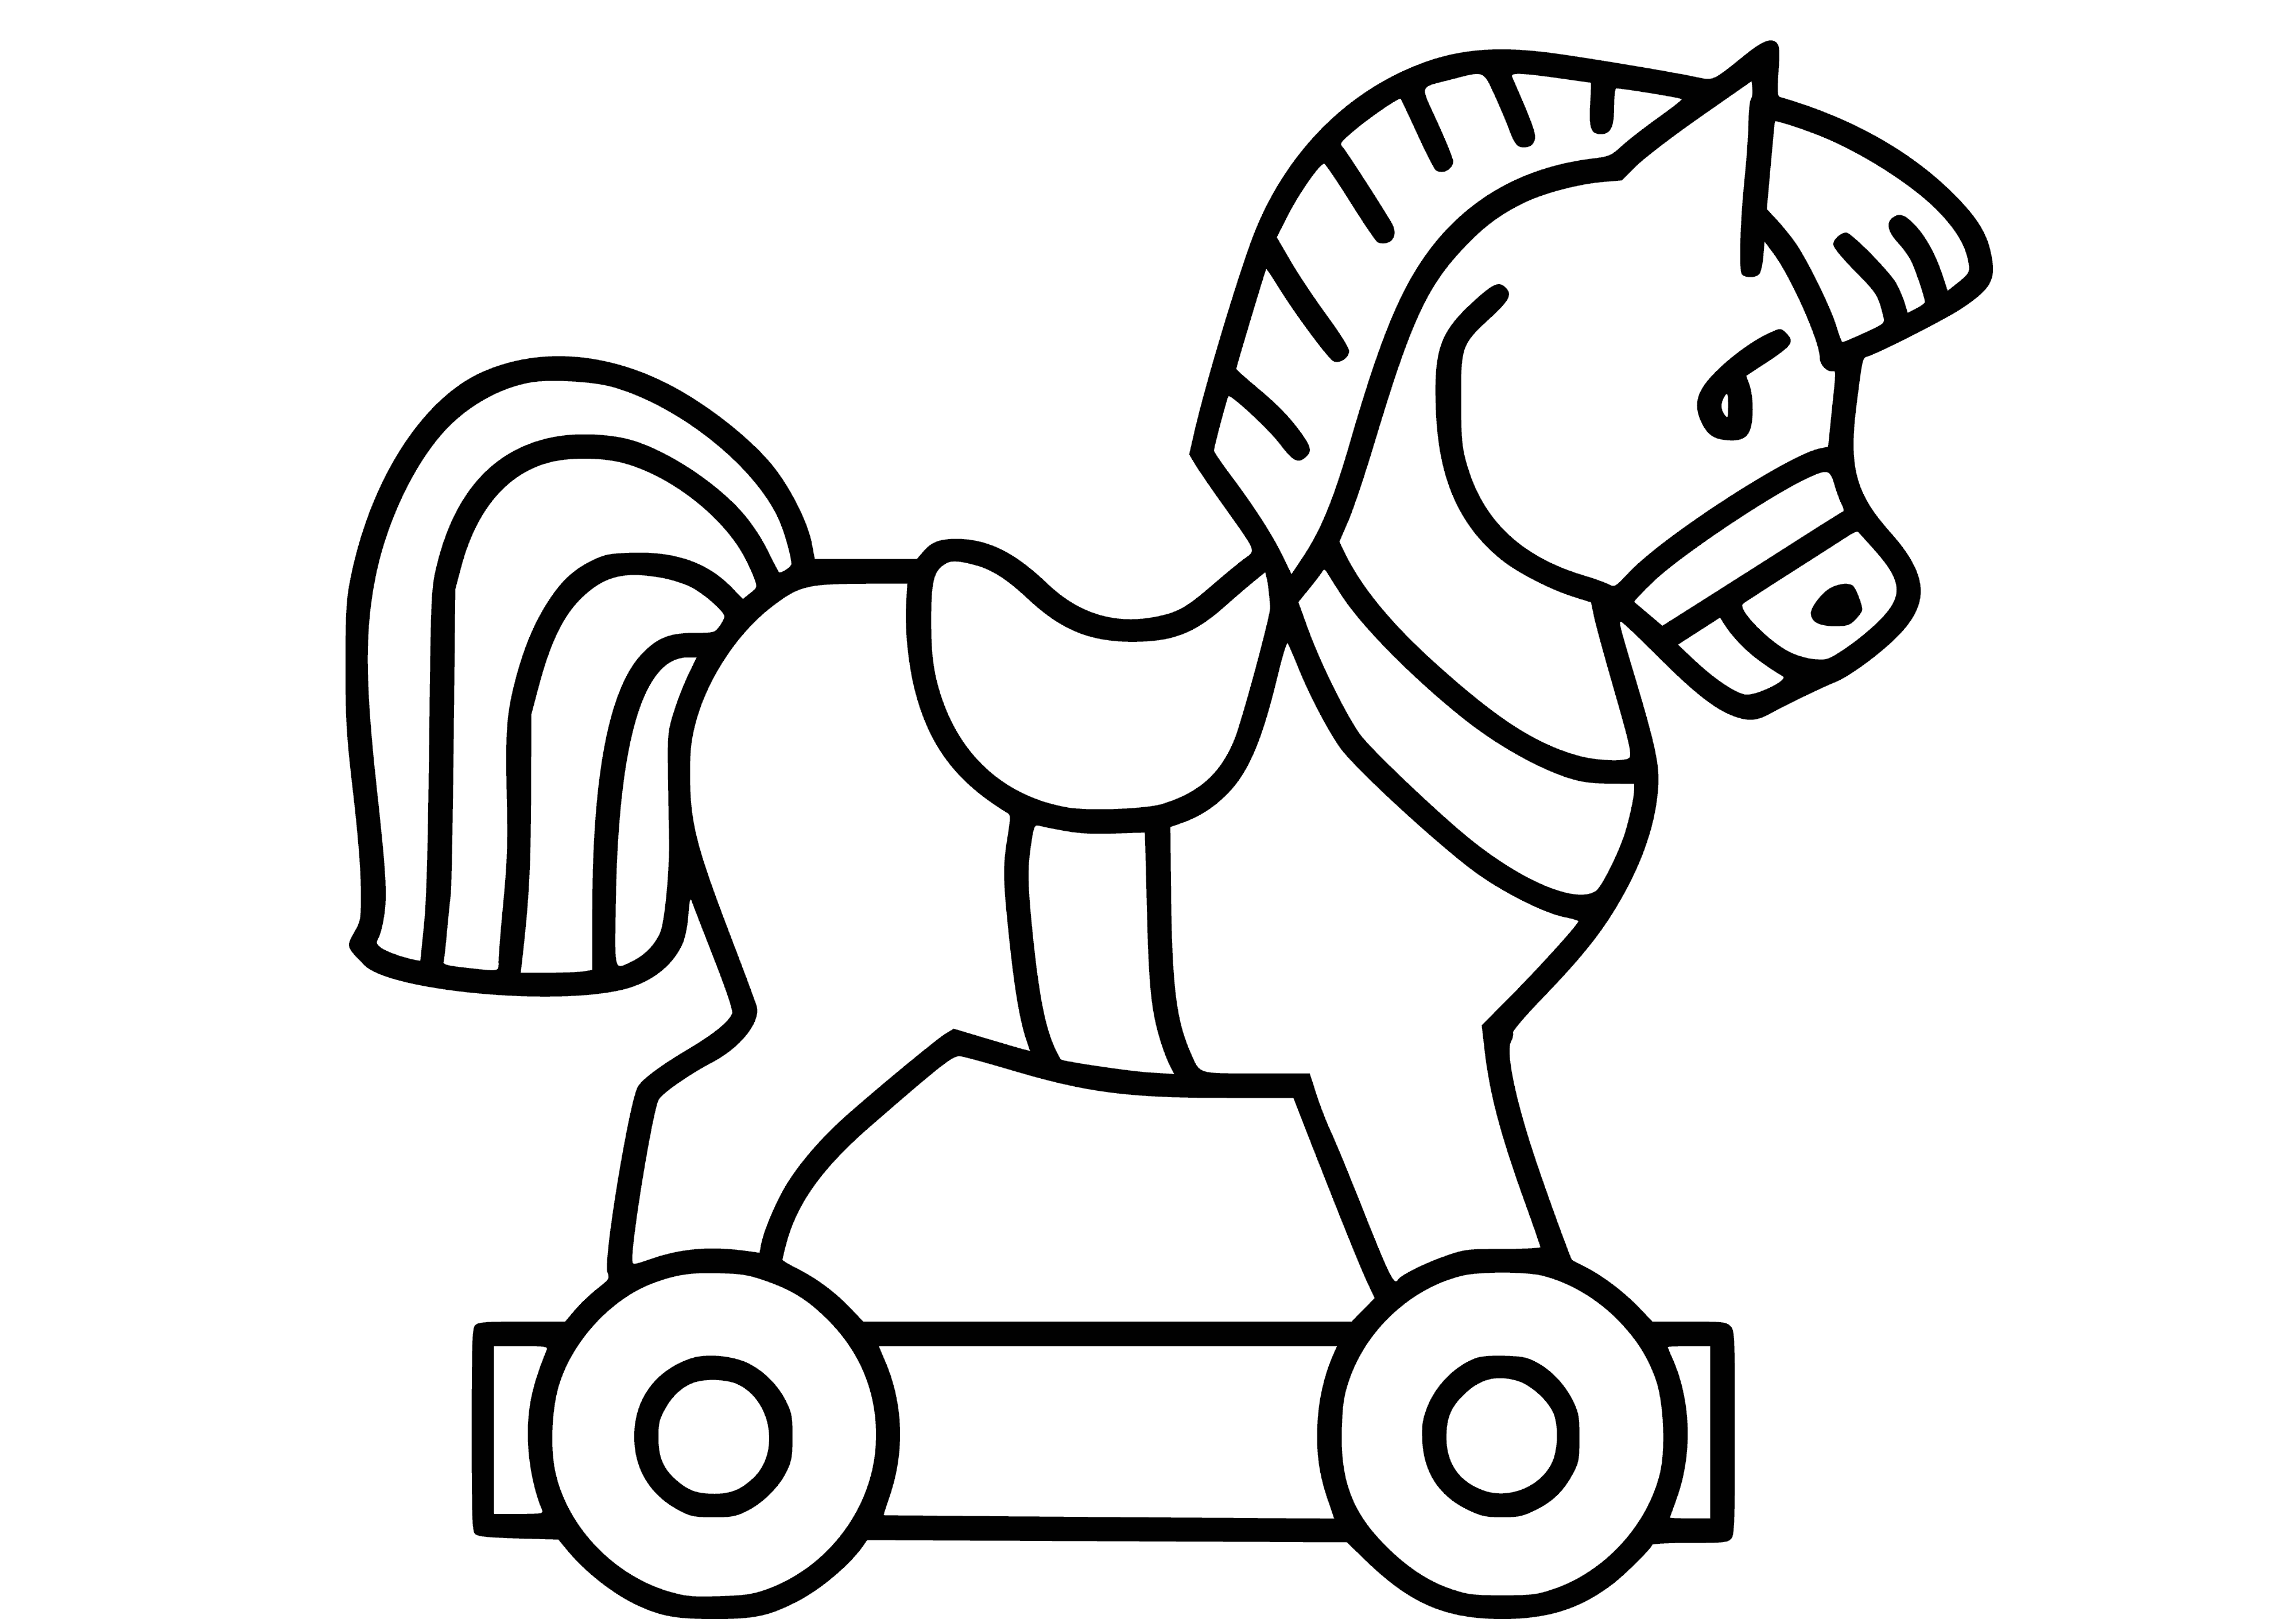 coloring page: A horse stands in a grassy field, with lightbrown fur, a long mane and tail, dark brown hooves, and a blue sky with white clouds in the background.